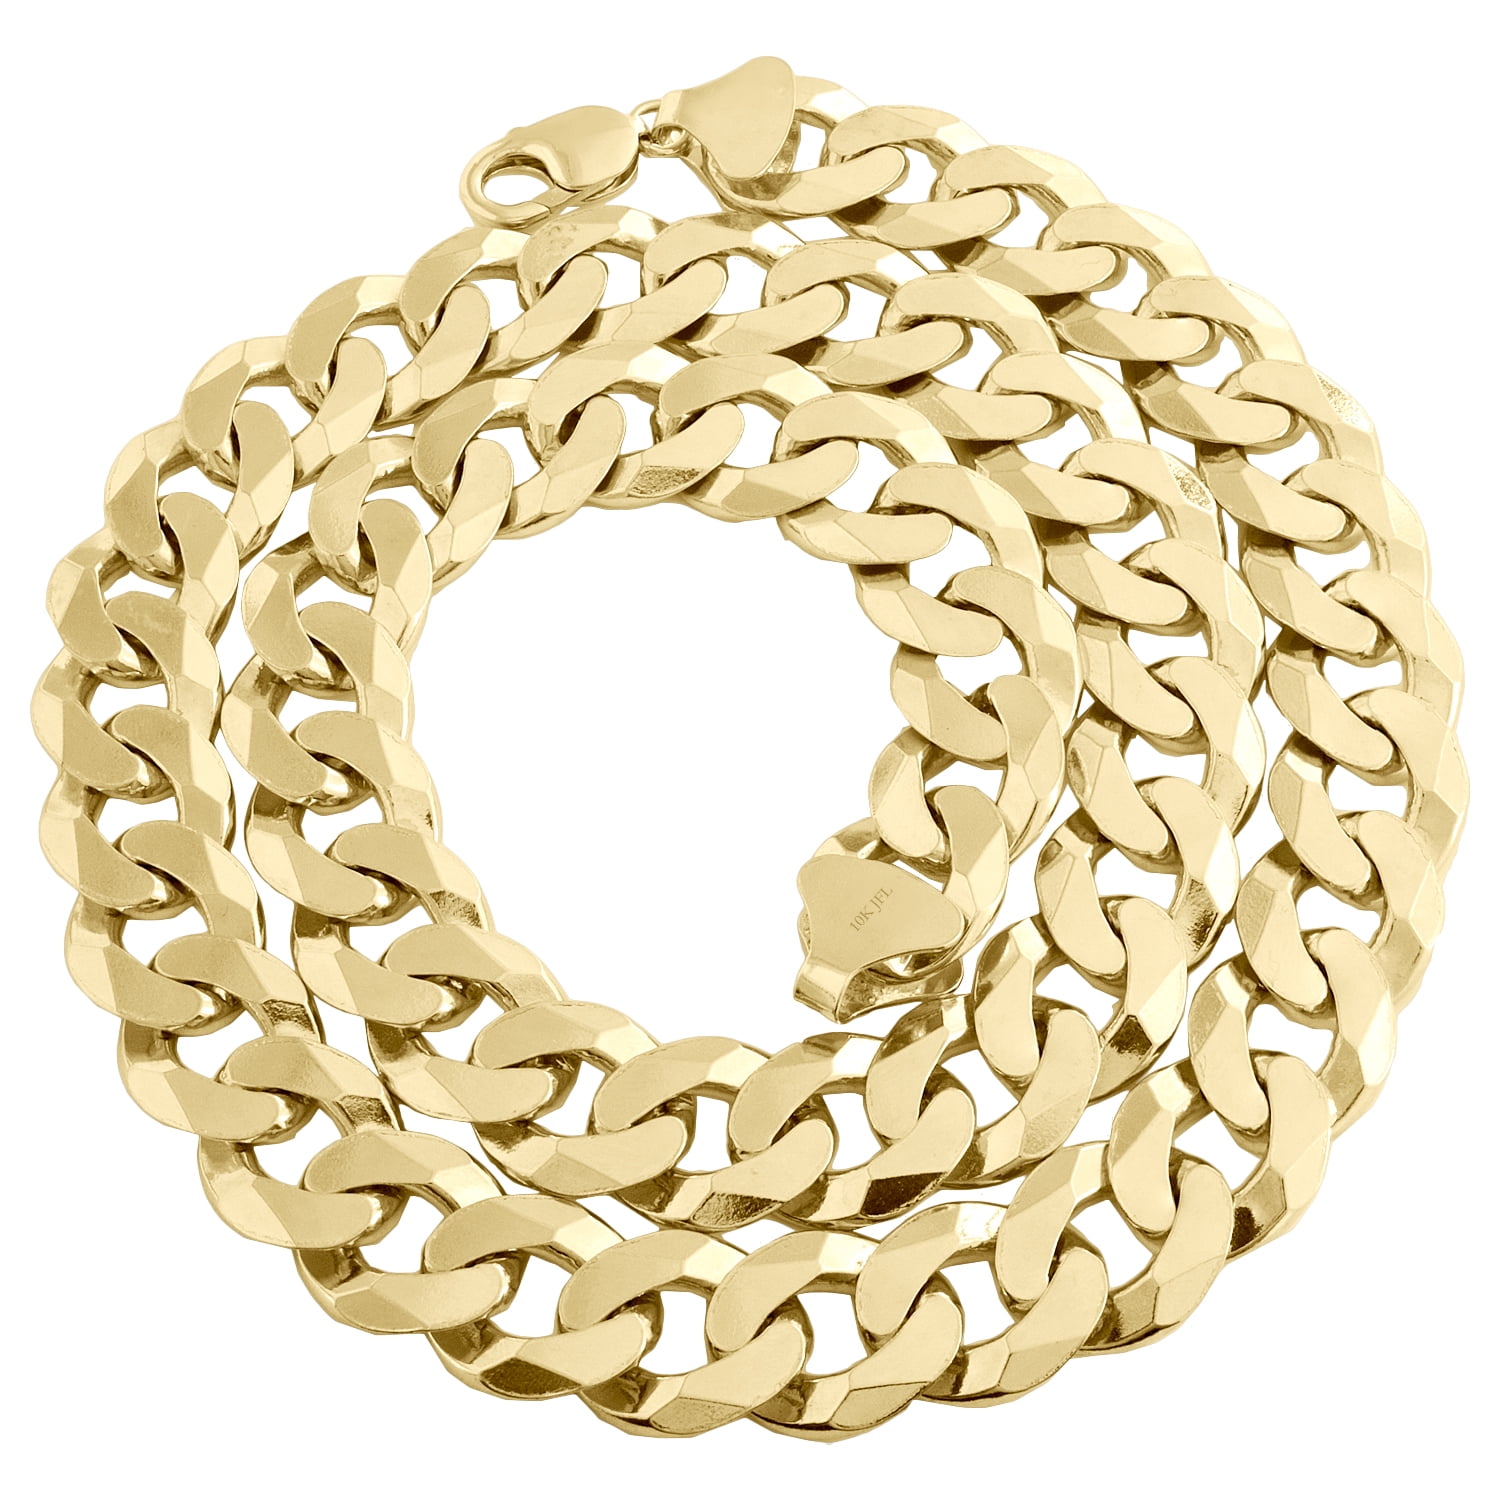 Miami Cuban Curb Link Mens Stainless Steel 16mm 14k Gold Tone Chain Bracelet 